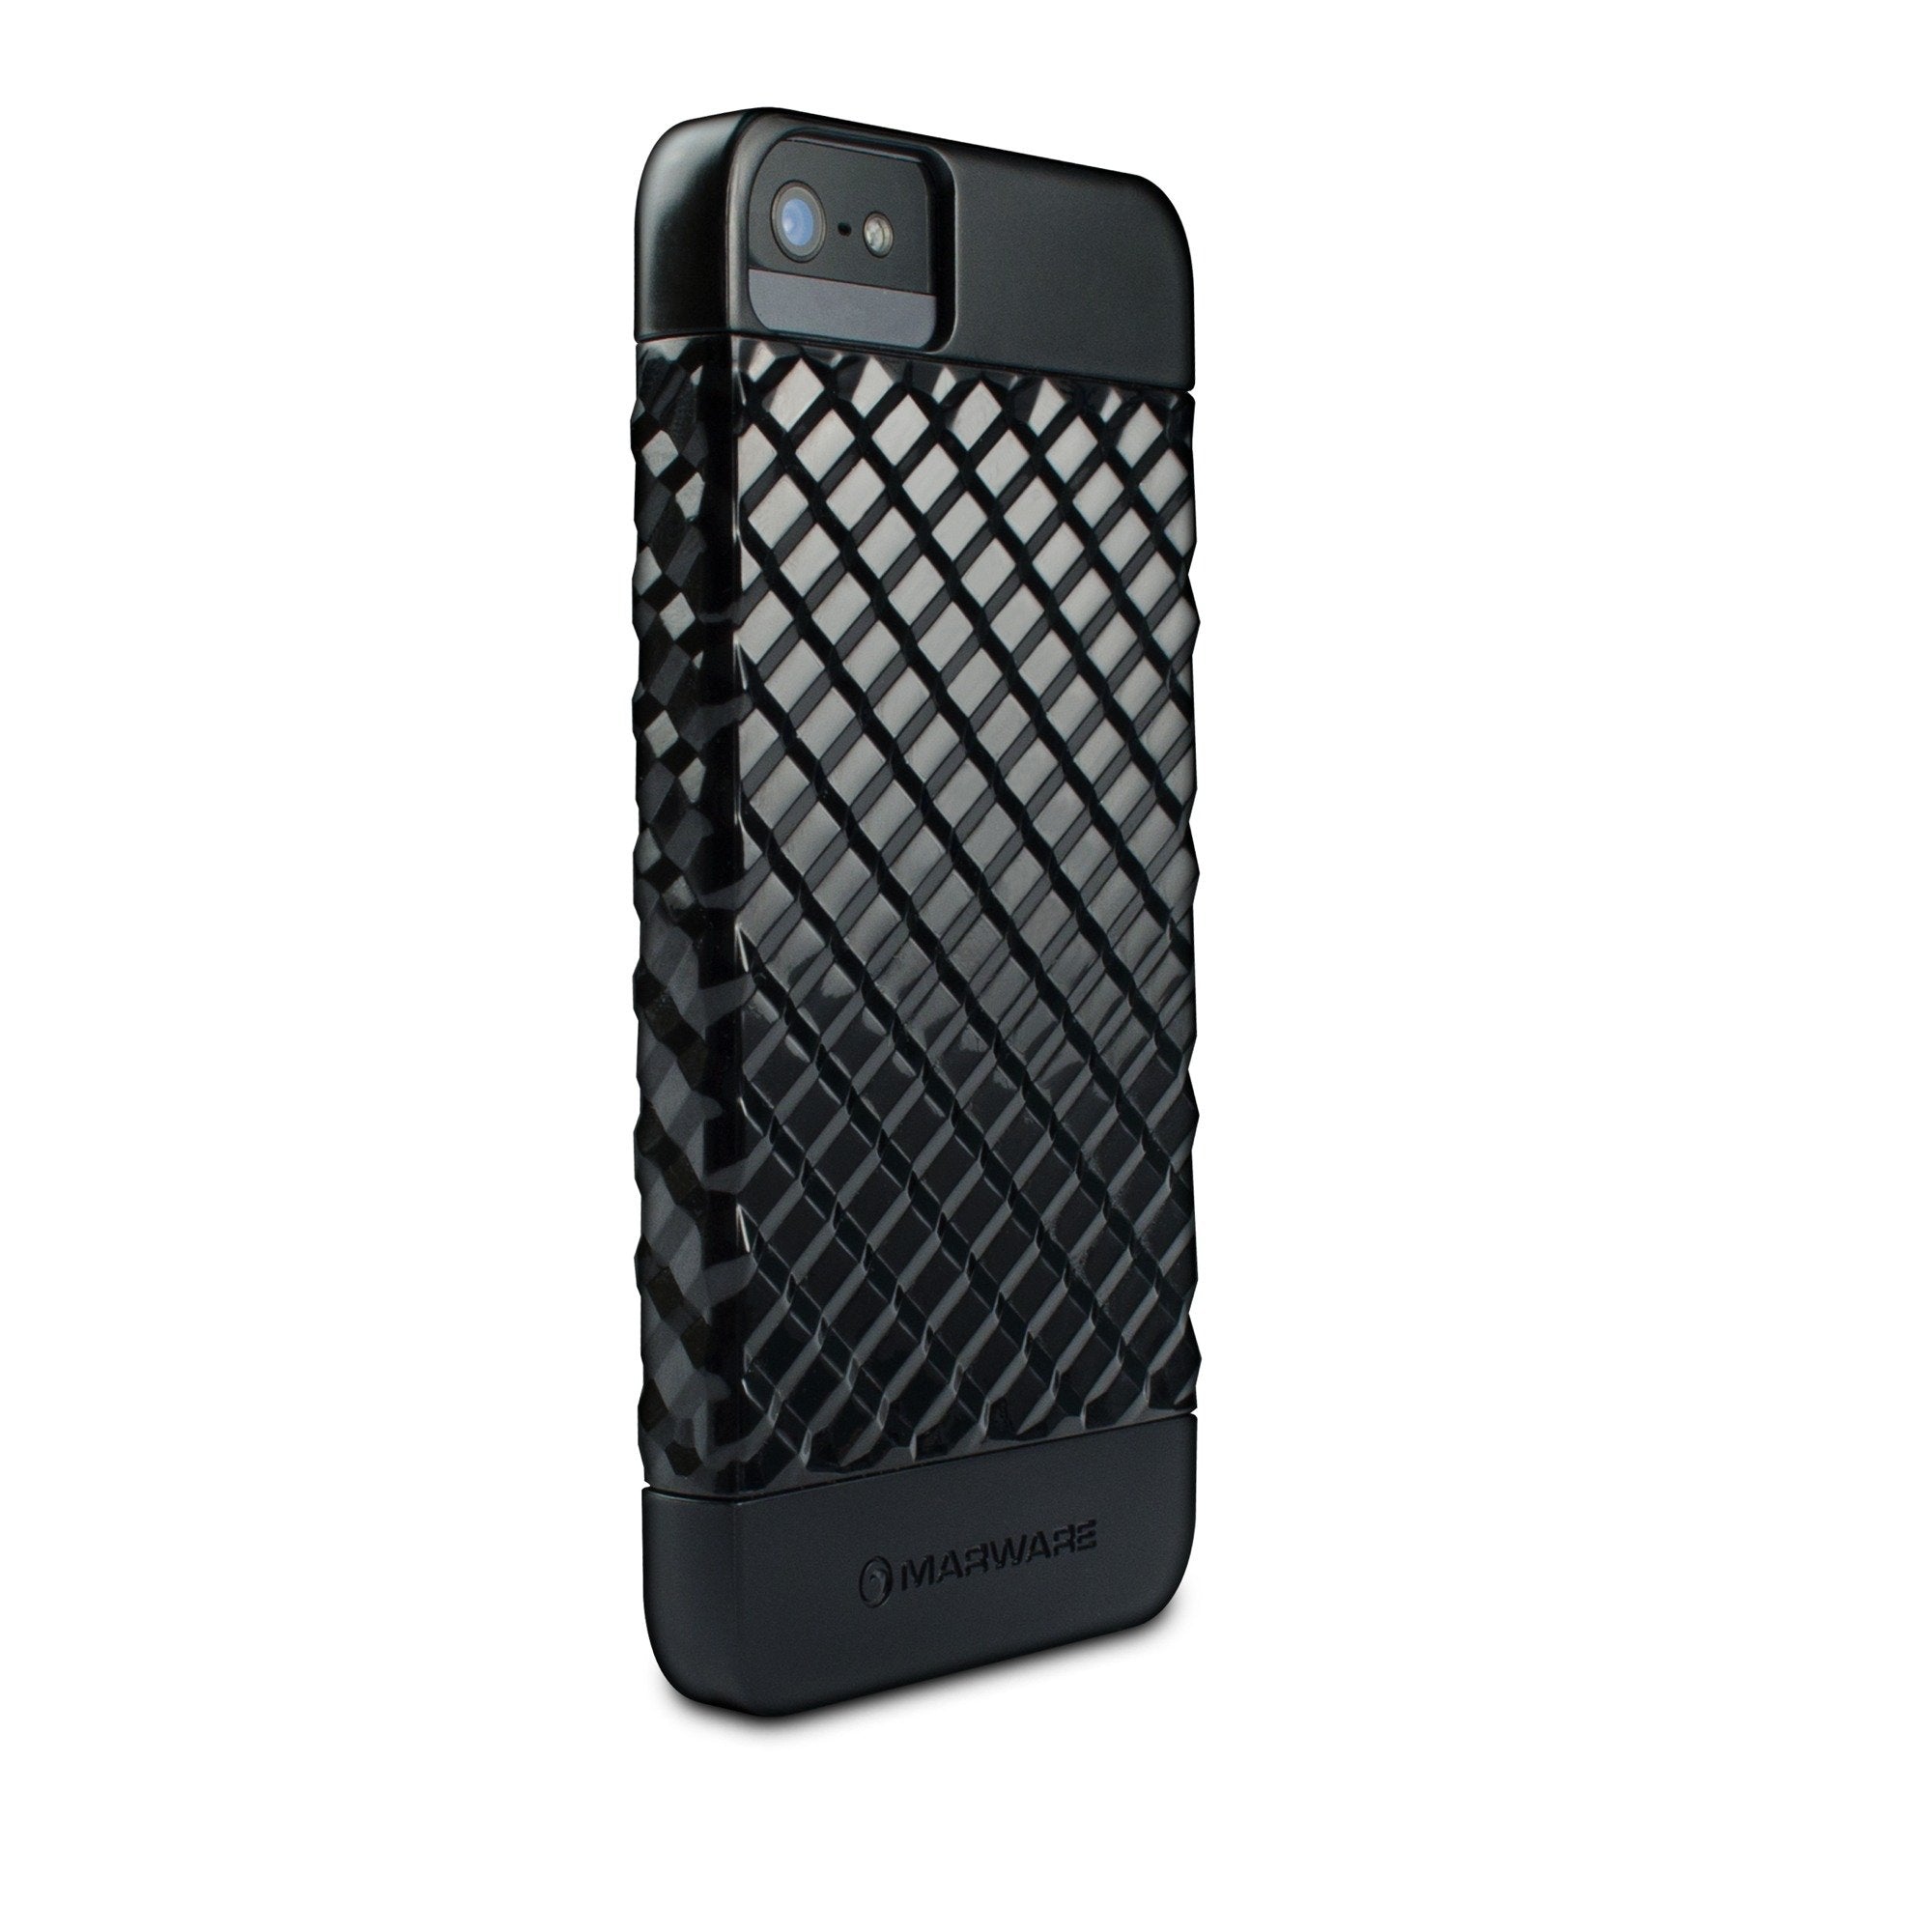 Marware ADRE1011 rEVOLUTION for iPhone 5 - 1 Pack - Retail Packaging - Black